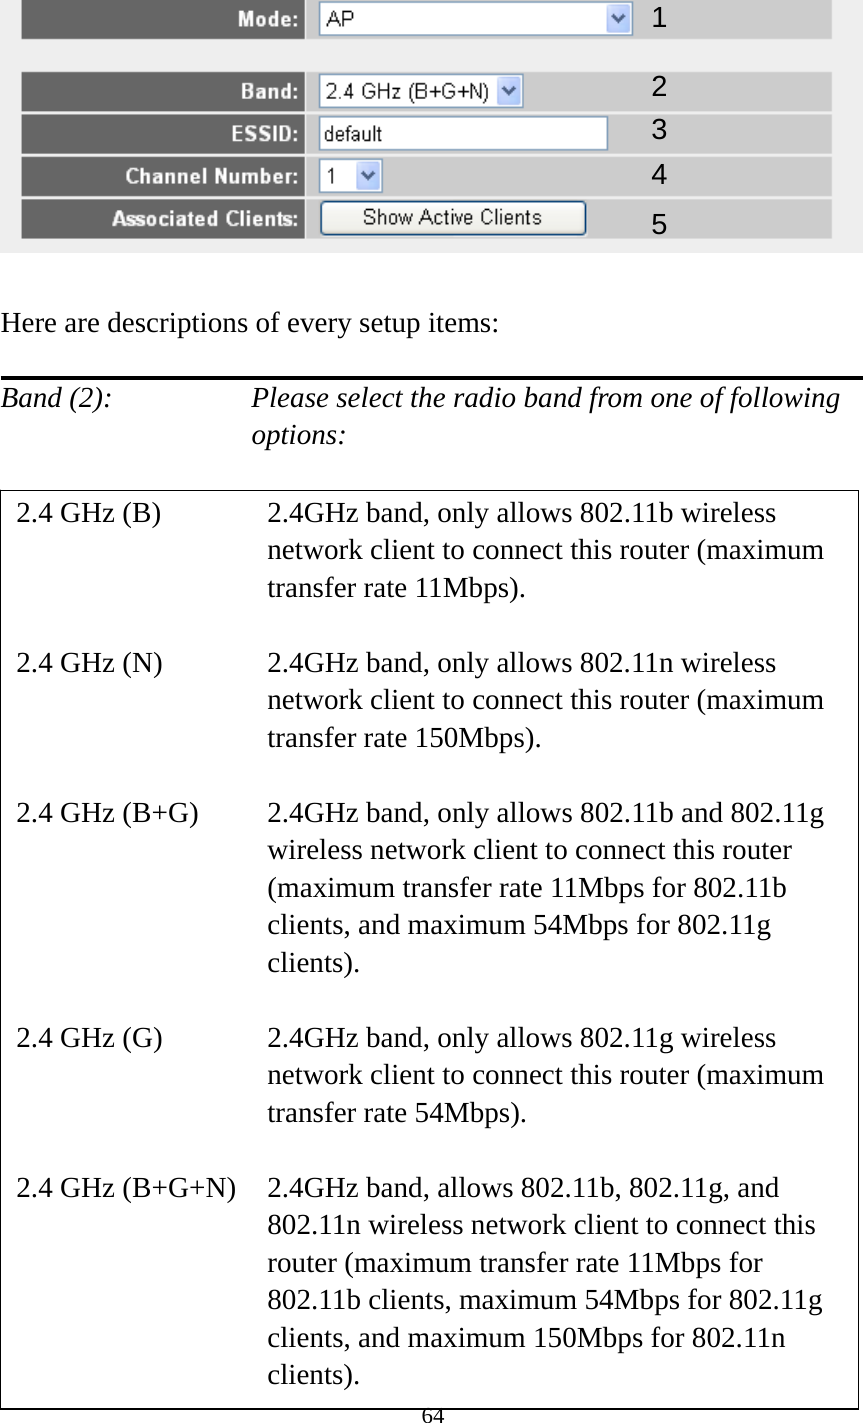 64    Here are descriptions of every setup items:  Band (2):    Please select the radio band from one of following options:                         12 34 2.4 GHz (B)  2.4GHz band, only allows 802.11b wireless network client to connect this router (maximum transfer rate 11Mbps).  2.4 GHz (N)  2.4GHz band, only allows 802.11n wireless network client to connect this router (maximum transfer rate 150Mbps).  2.4 GHz (B+G)    2.4GHz band, only allows 802.11b and 802.11g wireless network client to connect this router (maximum transfer rate 11Mbps for 802.11b clients, and maximum 54Mbps for 802.11g clients).  2.4 GHz (G)    2.4GHz band, only allows 802.11g wireless network client to connect this router (maximum transfer rate 54Mbps).  2.4 GHz (B+G+N)    2.4GHz band, allows 802.11b, 802.11g, and 802.11n wireless network client to connect this router (maximum transfer rate 11Mbps for 802.11b clients, maximum 54Mbps for 802.11g clients, and maximum 150Mbps for 802.11n clients). 5 